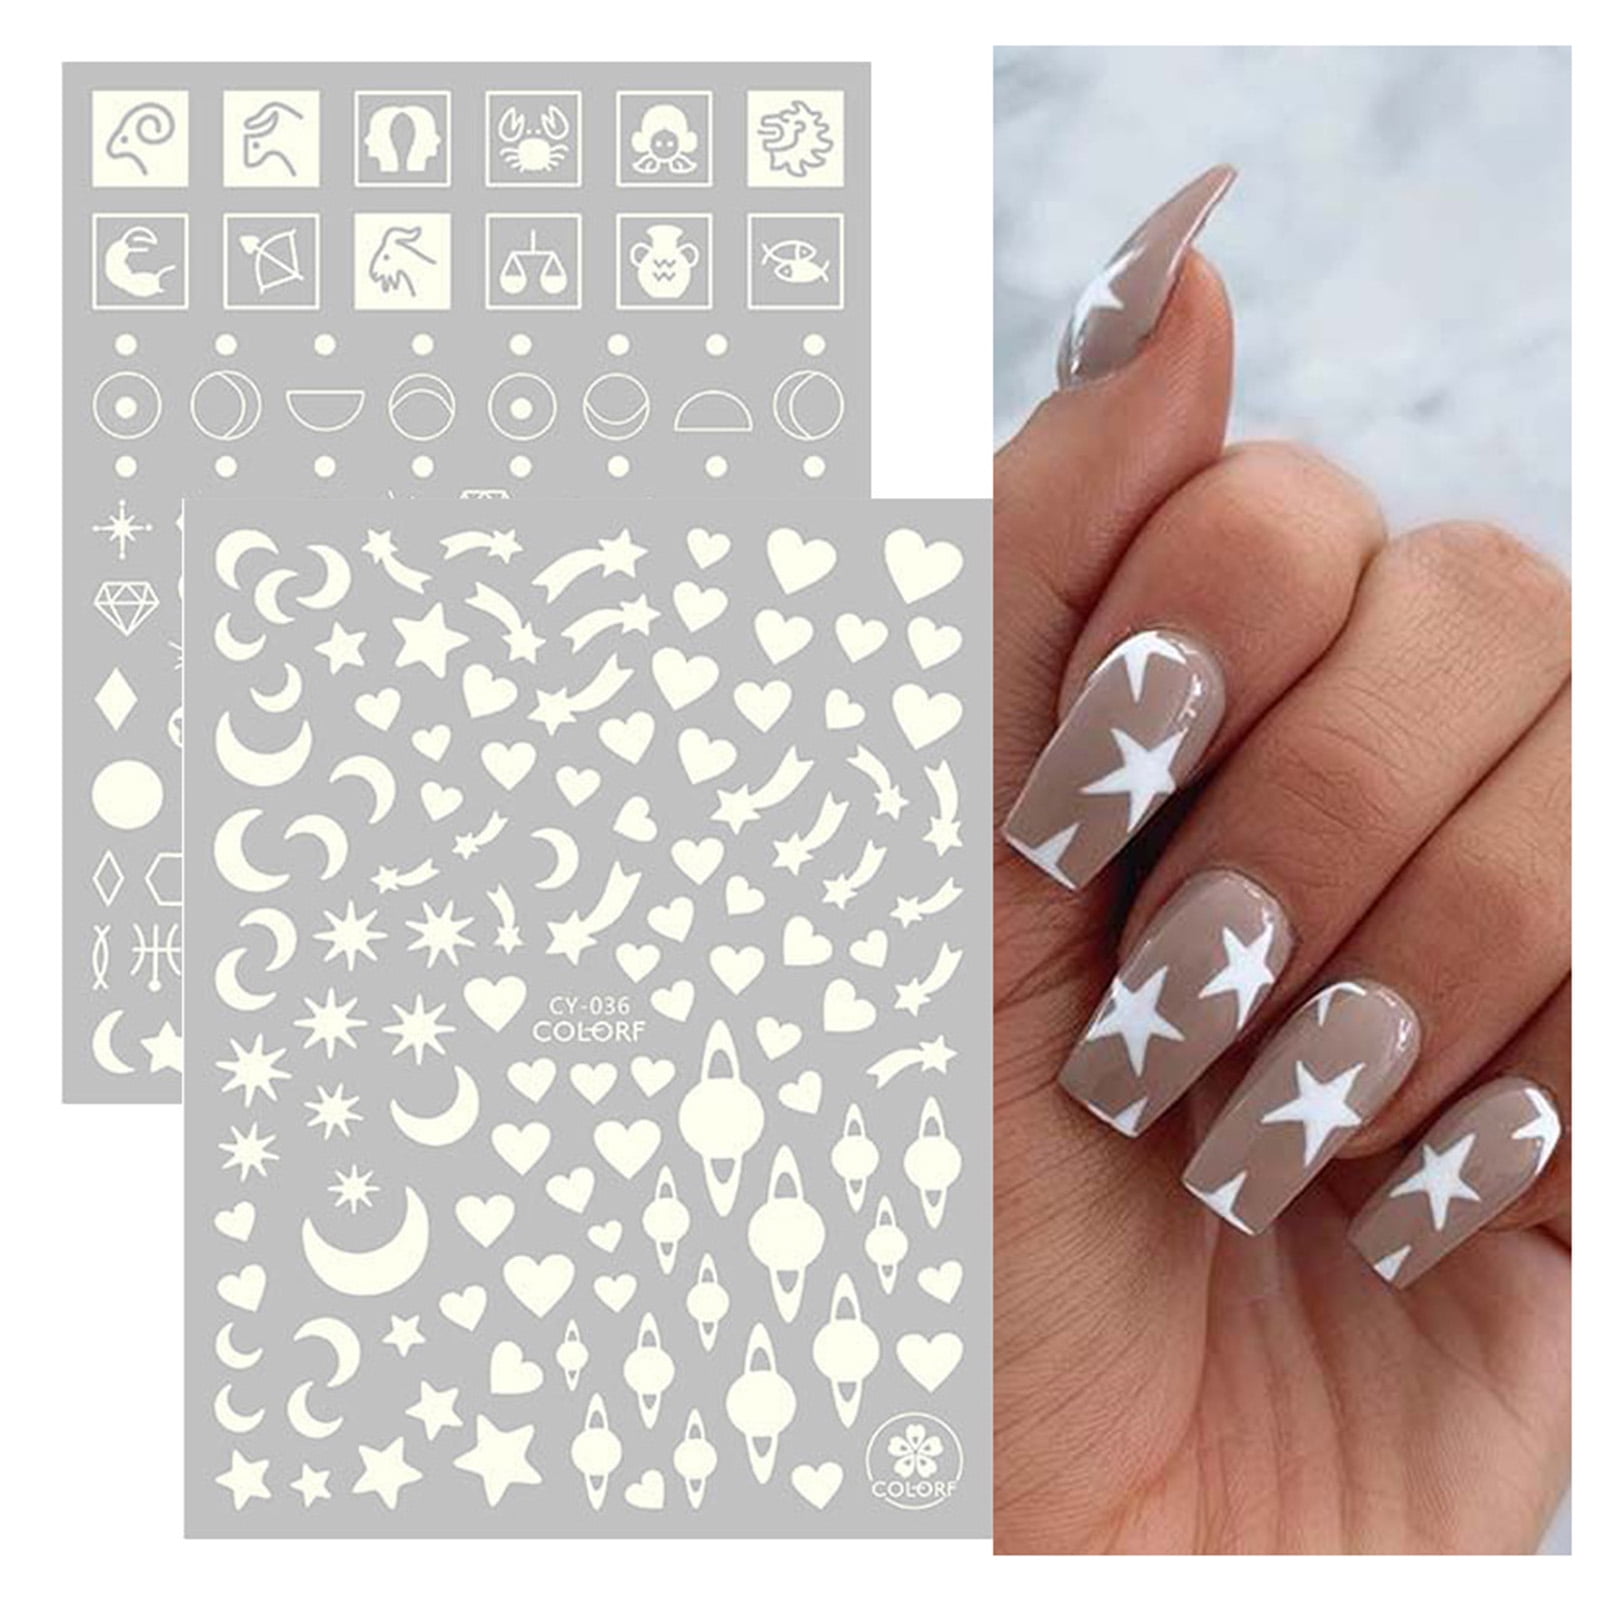 Zhaomeidaxi 6 Sheets Luminous Stars Moon Flowers Nail Art Stickers, 3D Self Adhesive Star Butterfly Flower Heart Nail Design for Women Girls, Glow in